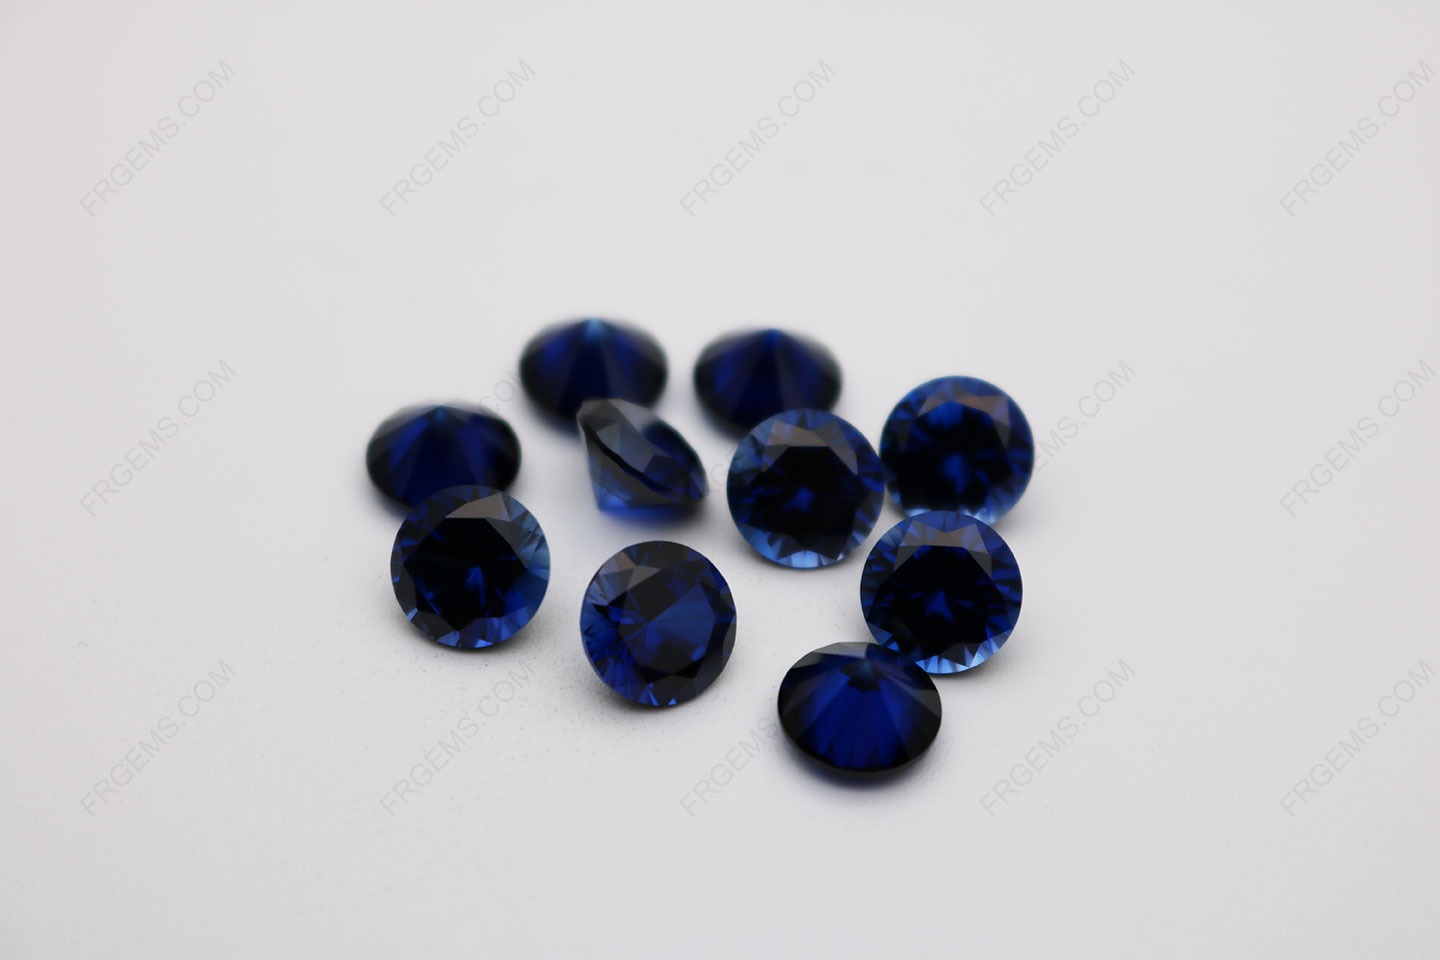 Loose Synthetic Lab Created Corundum Blue Sapphire 34# Round Shape Faceted Cut 6.50mm stones Suppliers and wholesale